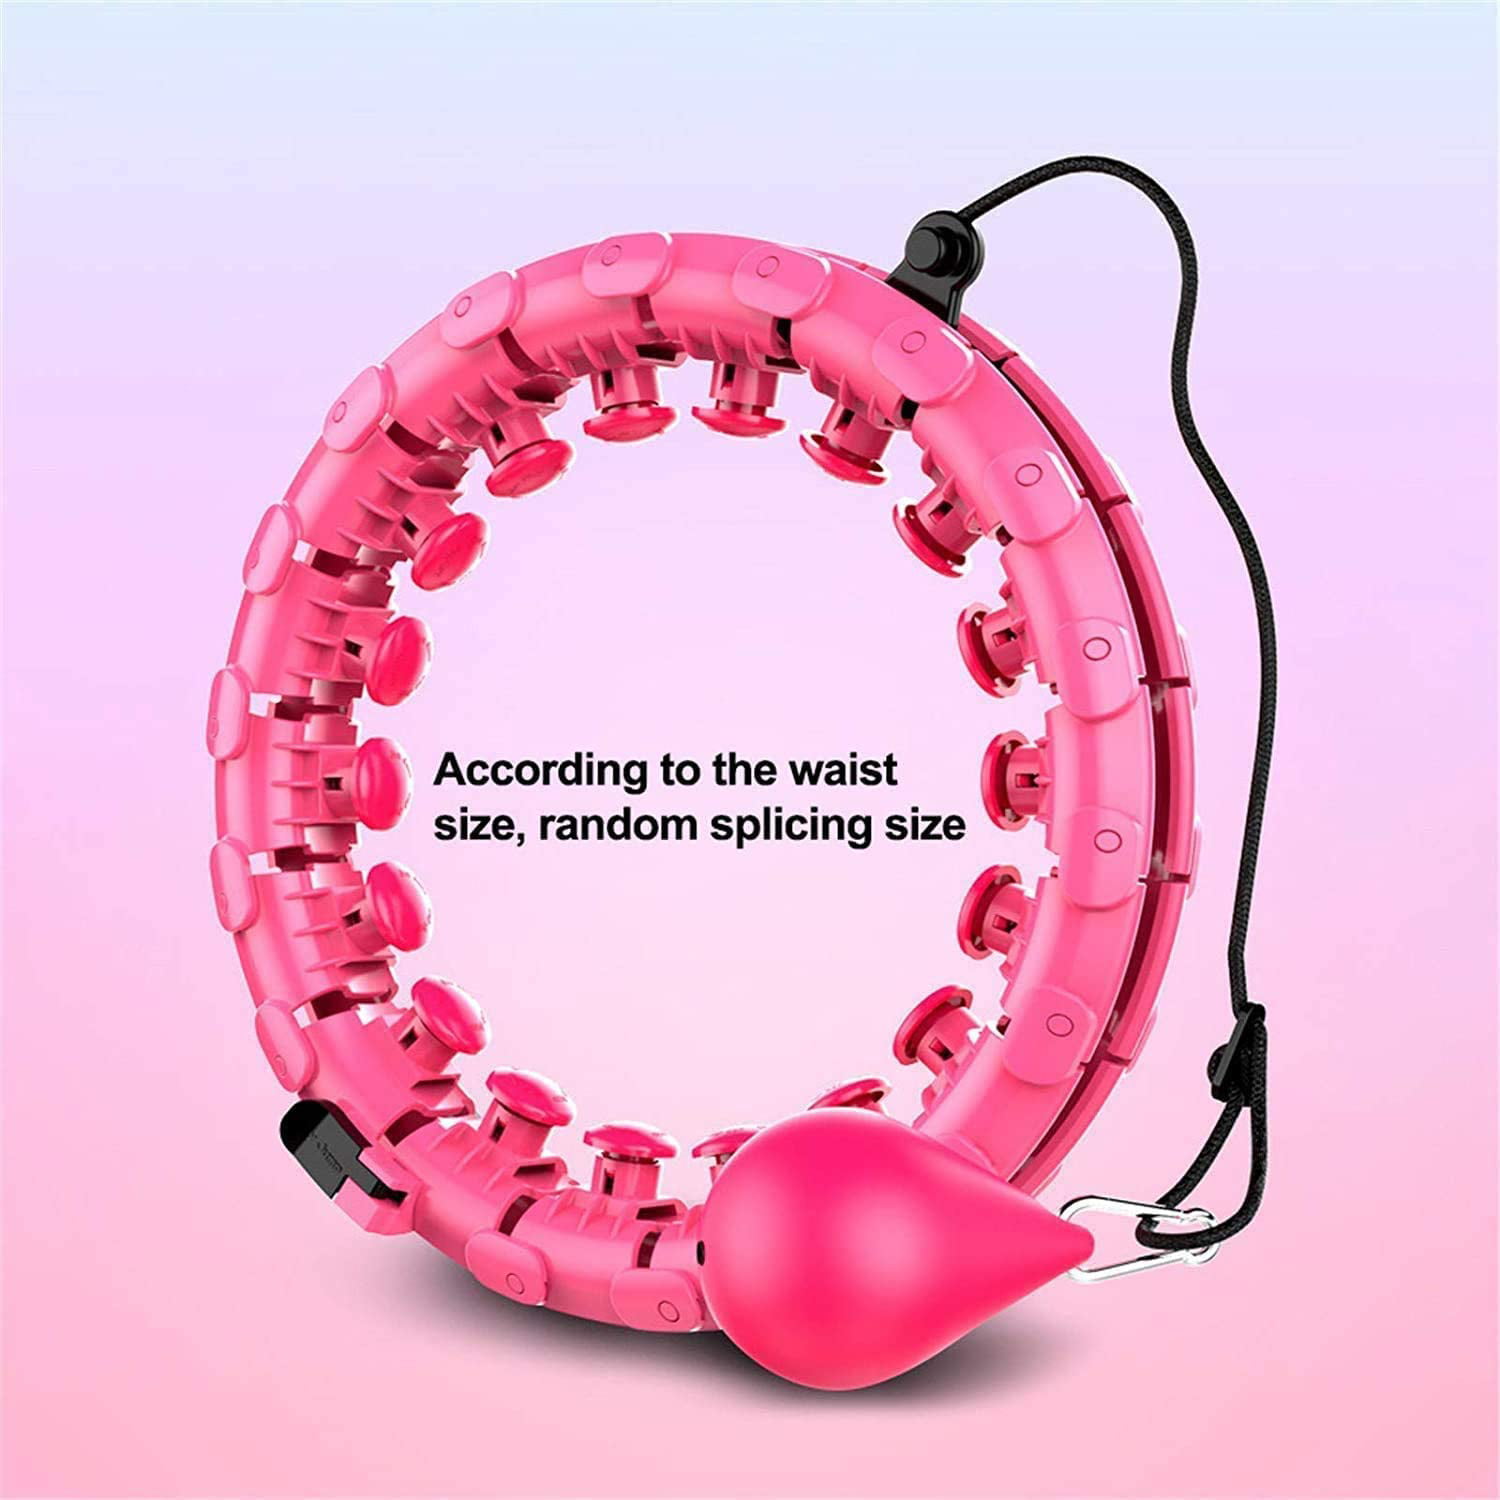 Smart 24 Sections Detachable Adjustable Auto-Spinning Ball Hoola Hoop Non-Fall Exercise Hoops Smart Weighted Hoola Hoop 2 in 1 Fitness Weight Loss Massage Suitable For Adults And Children. Hula Hoops For Adults Weight Loss 